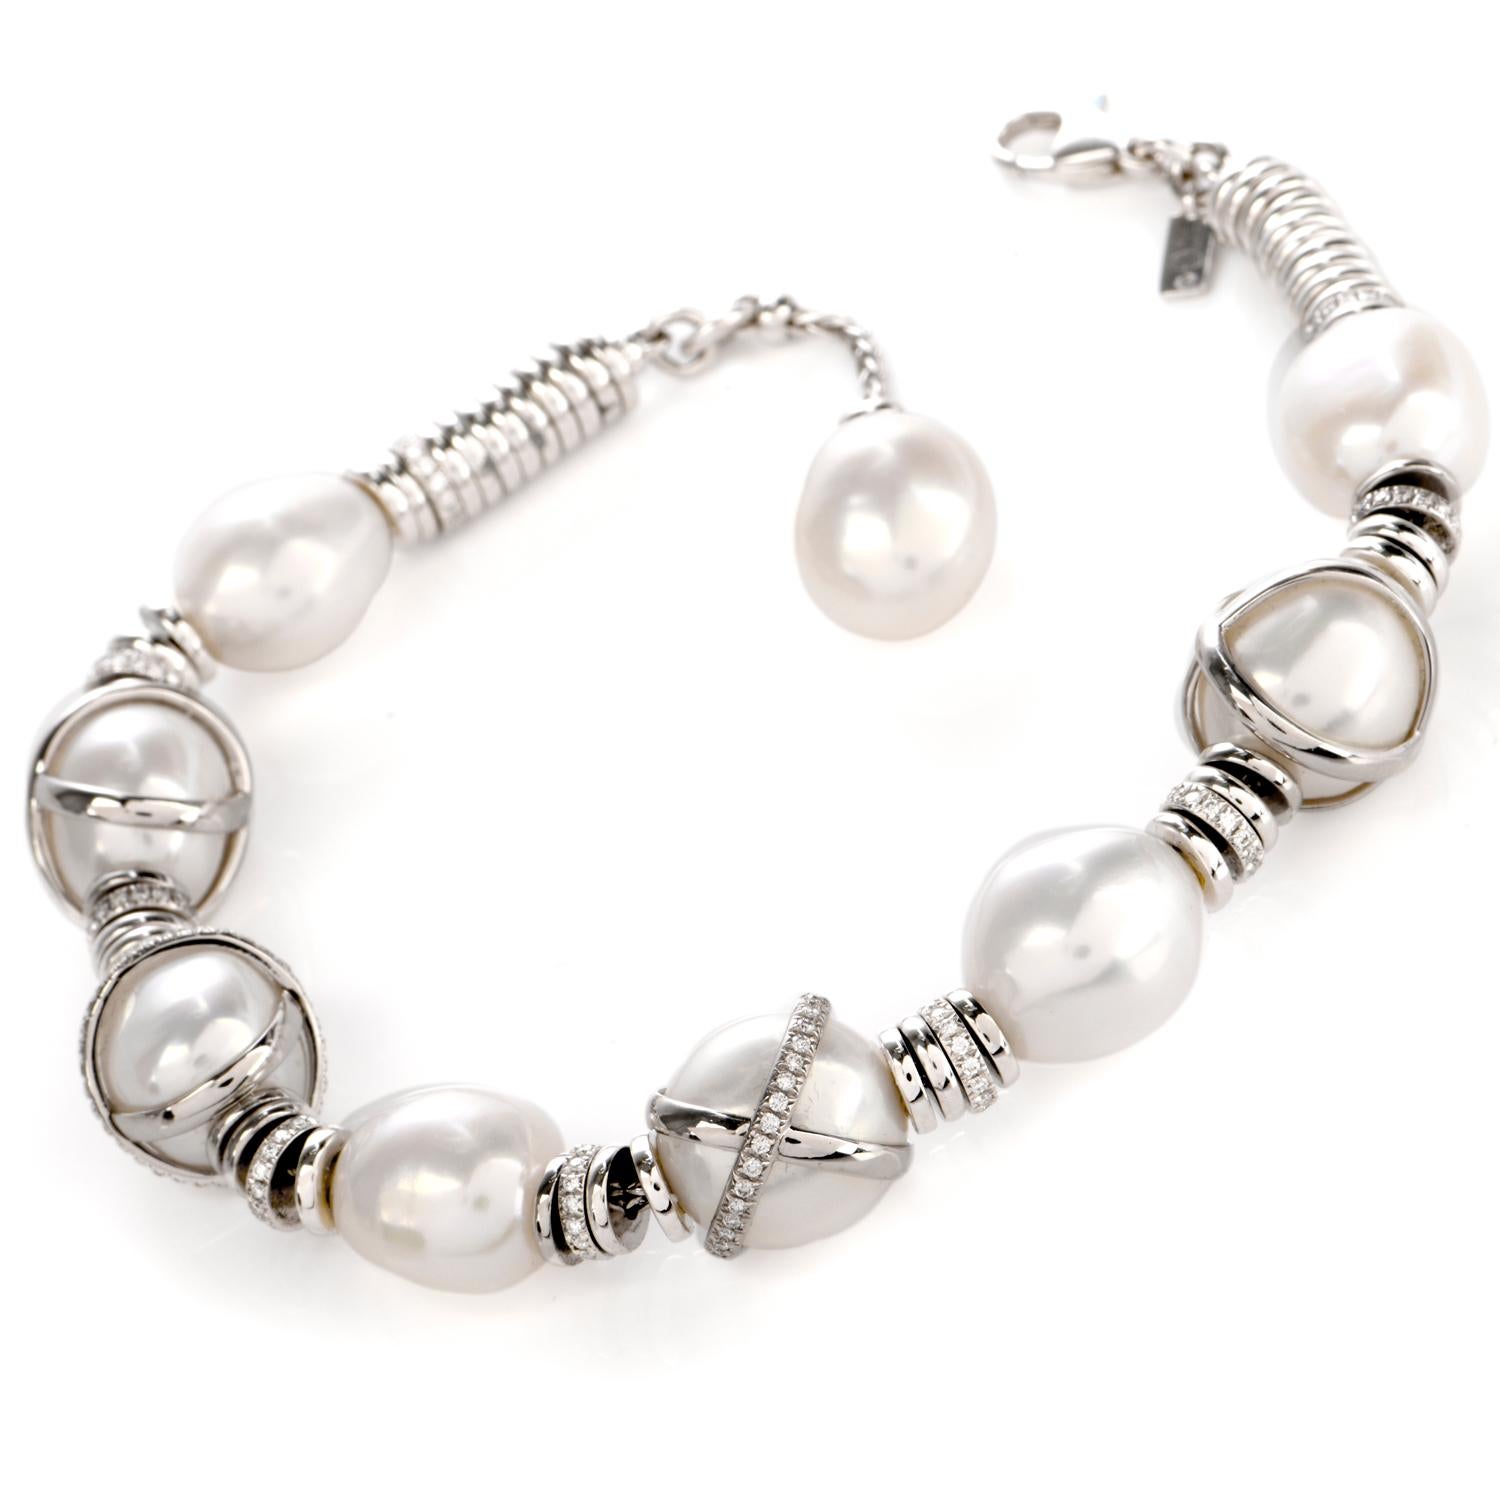 This stunning pearl and diamond bracelet is crafted in solid platinum, weighing 60.8 grams and measuring 7 inches around the wrist. Featuring 9 lustorous genuine pearls, measuring 11mm in diamter, of white silver tone. Composed of platinum disk